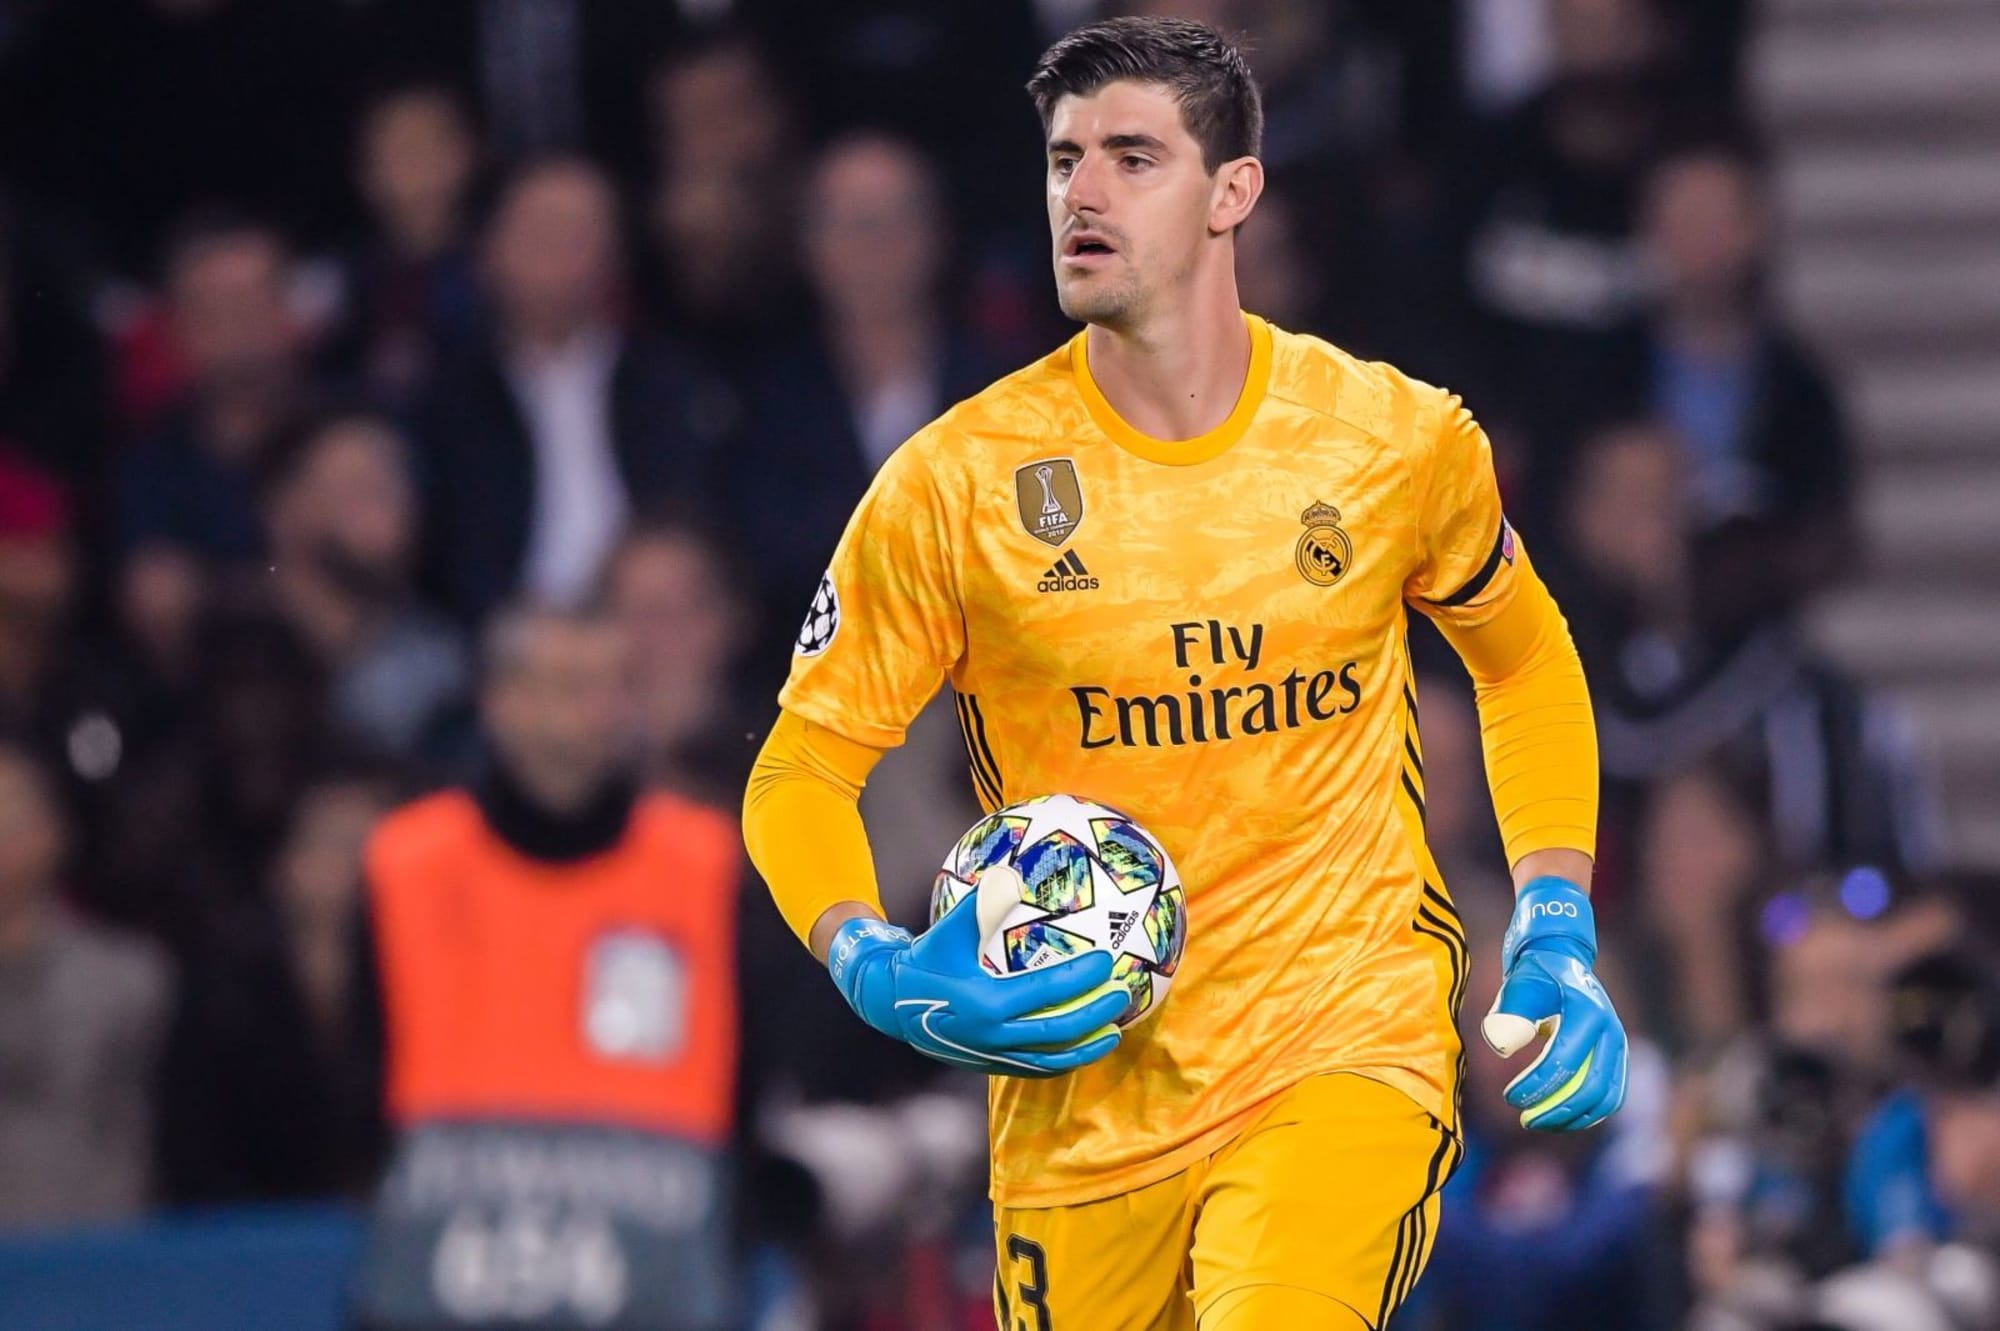 I Love How Real Madrid Fans Adore Courtois –Martinez